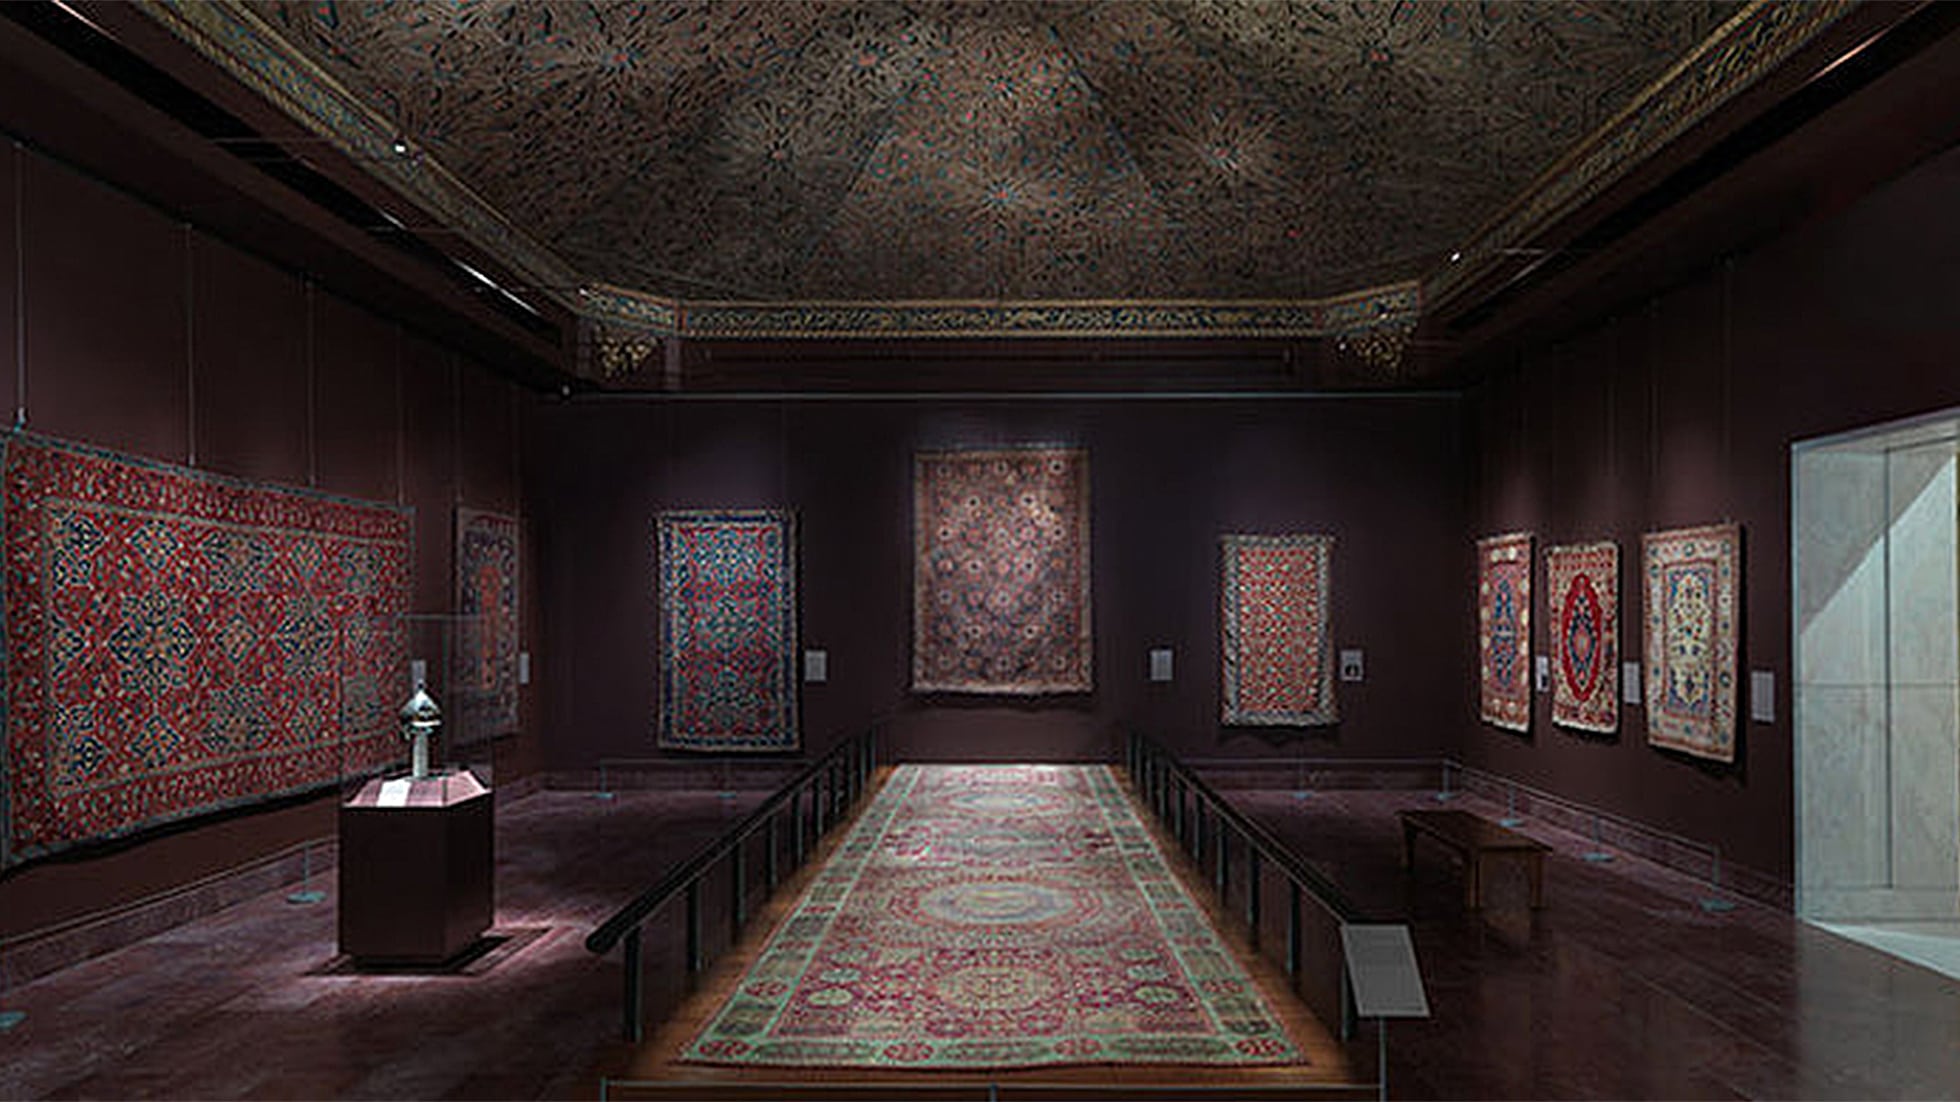 Ottoman World Gallery at the Met New York